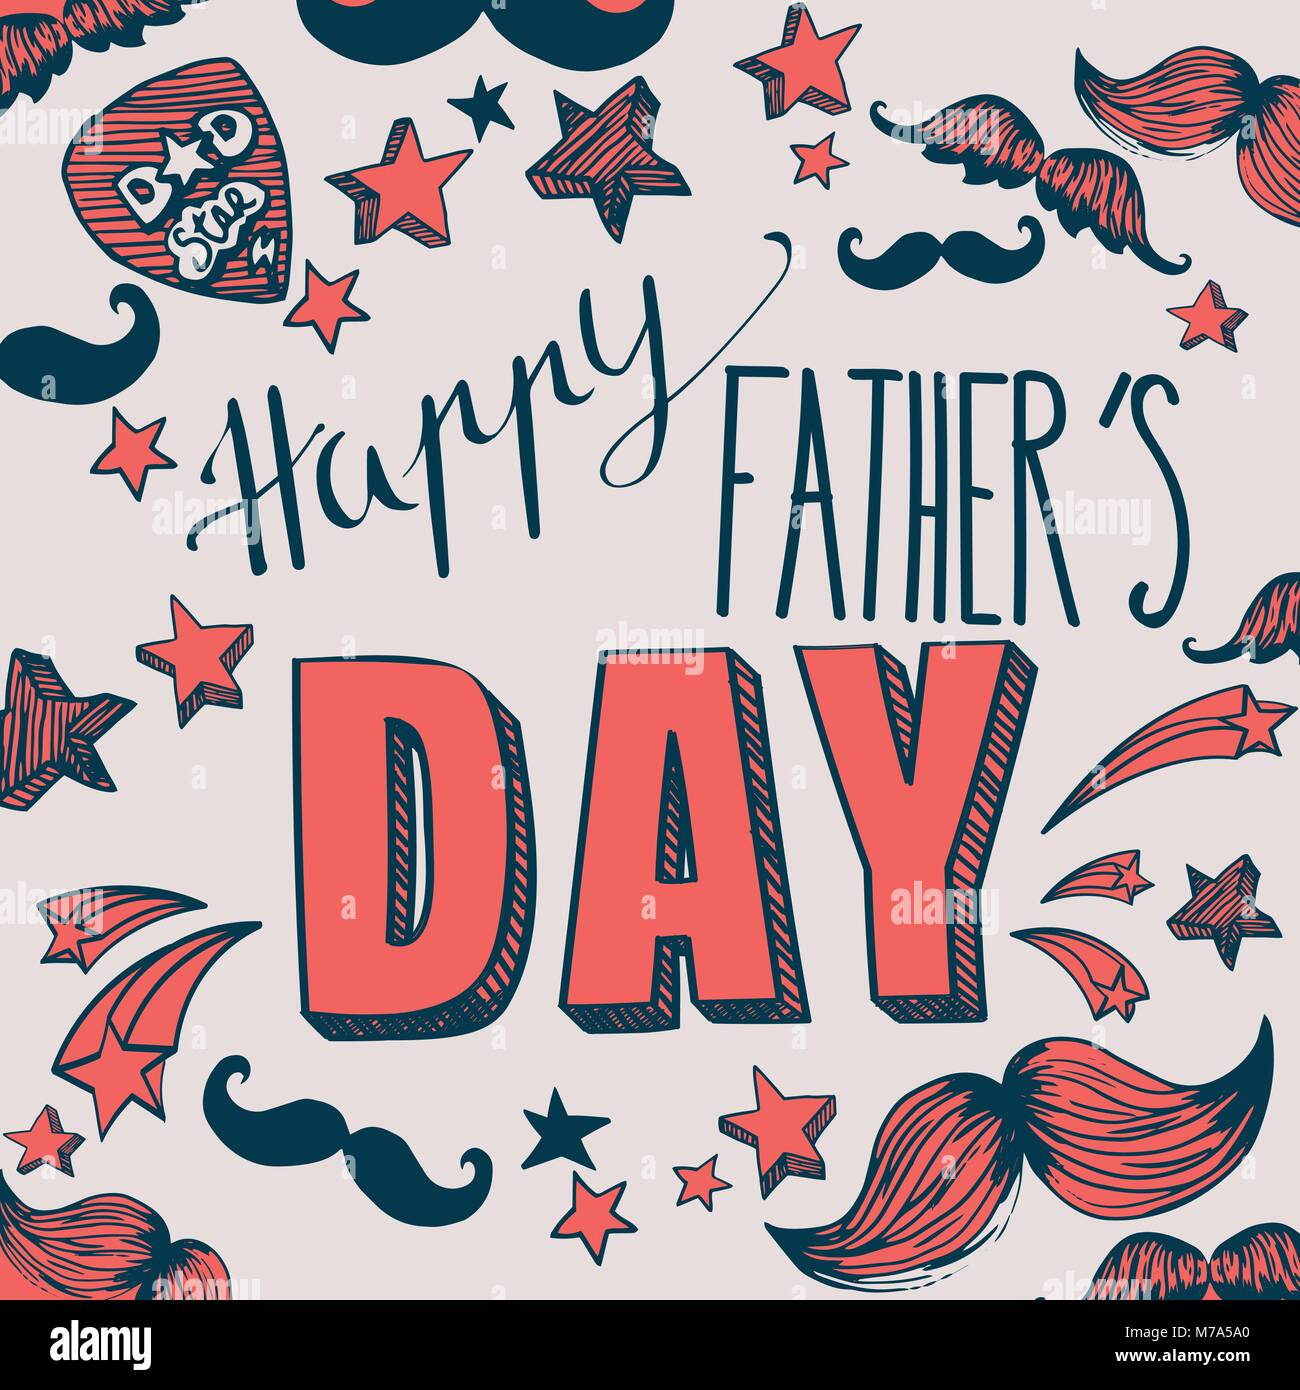 Happy Father's Day full vector elements background Stock Vector